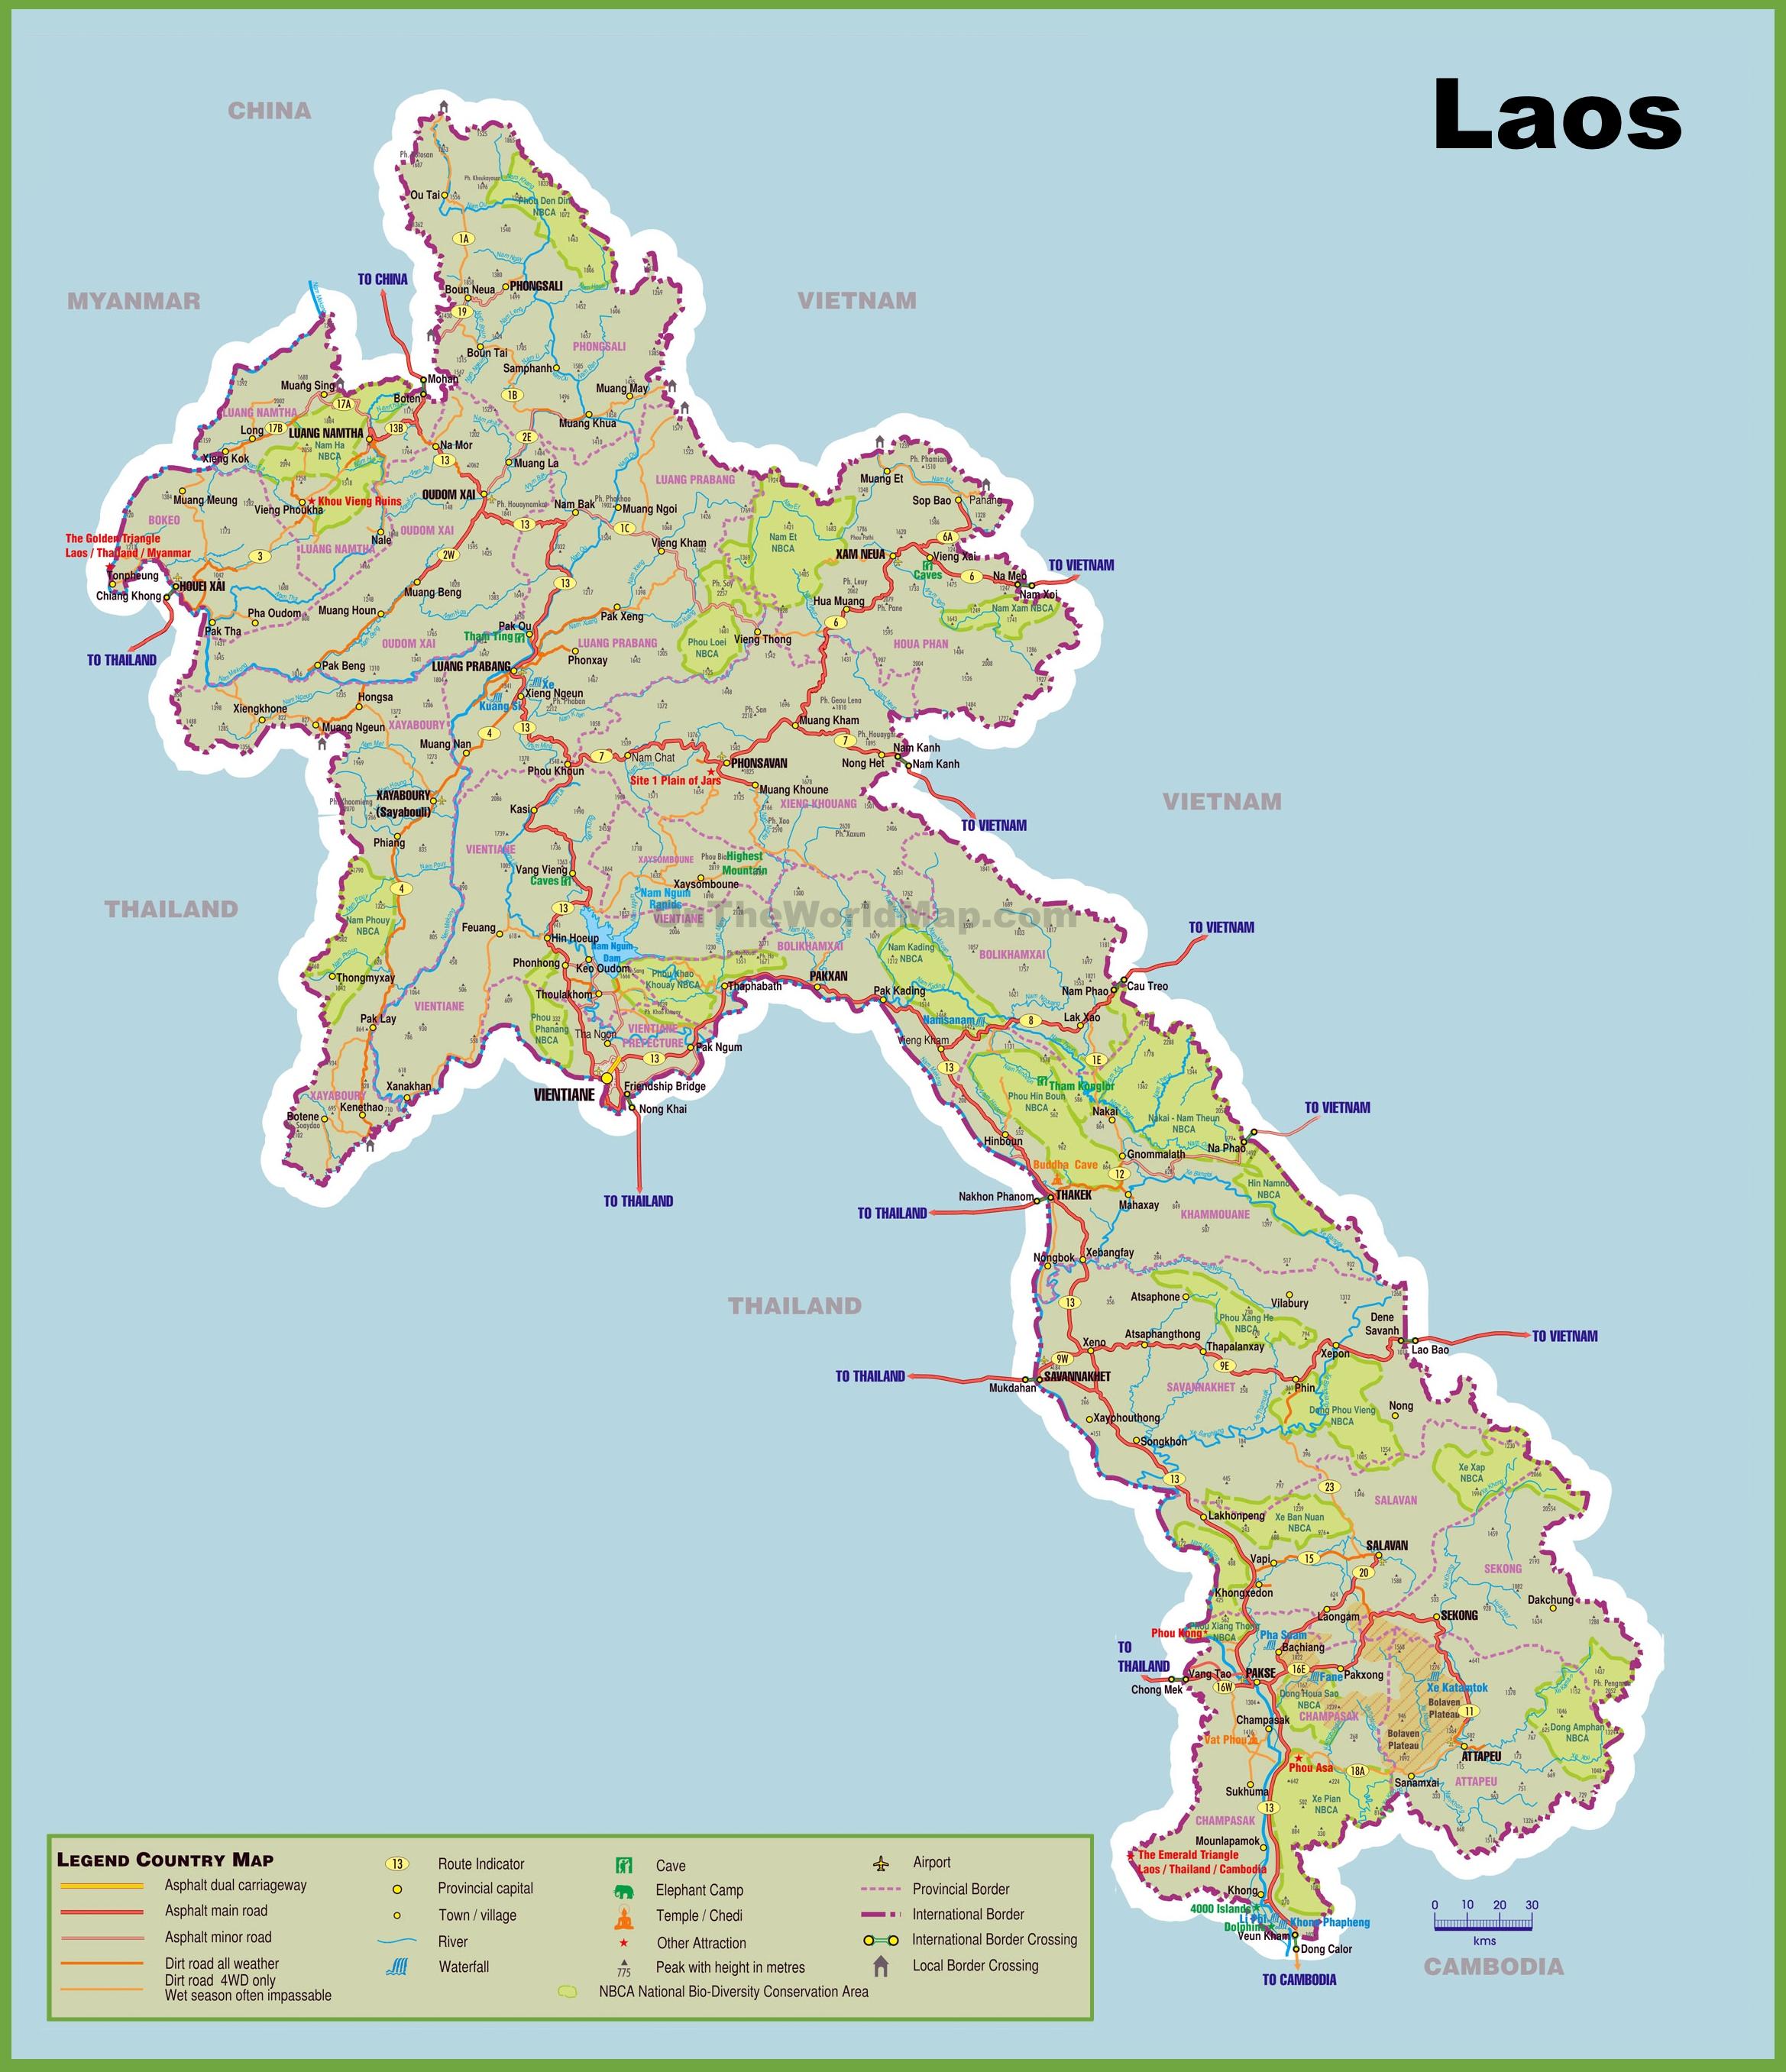 Laos tourist map - Laos tourist attractions map (South-Eastern Asia - Asia)